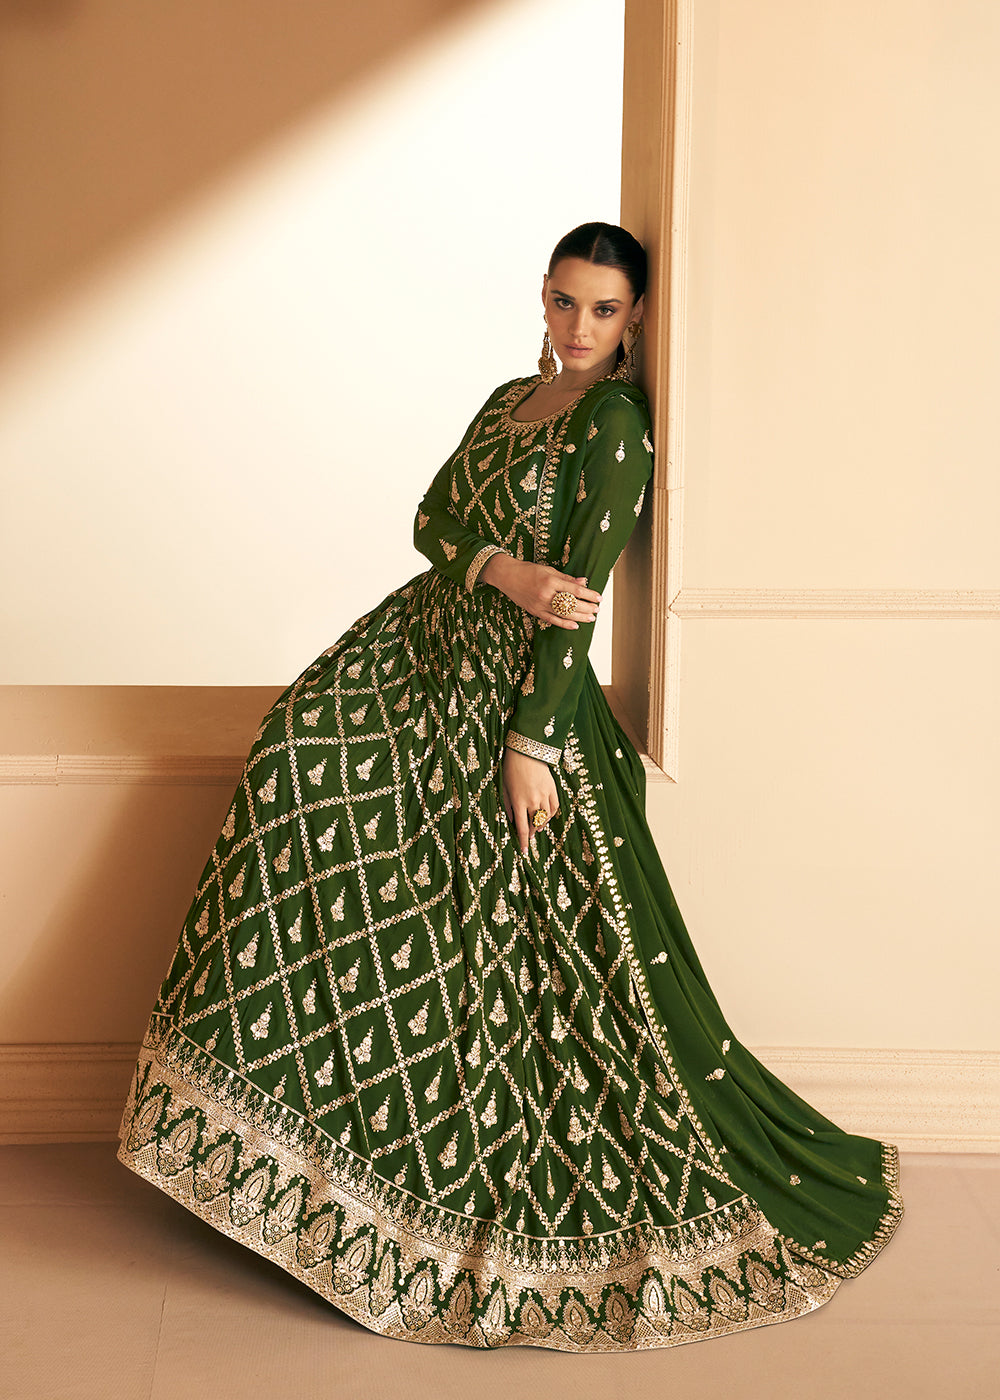 Buy Now Tempting Real Georgette Green Wedding Wear Anarkali Suit Online in USA, UK, Australia, New Zealand, Canada & Worldwide at Empress Clothing. 